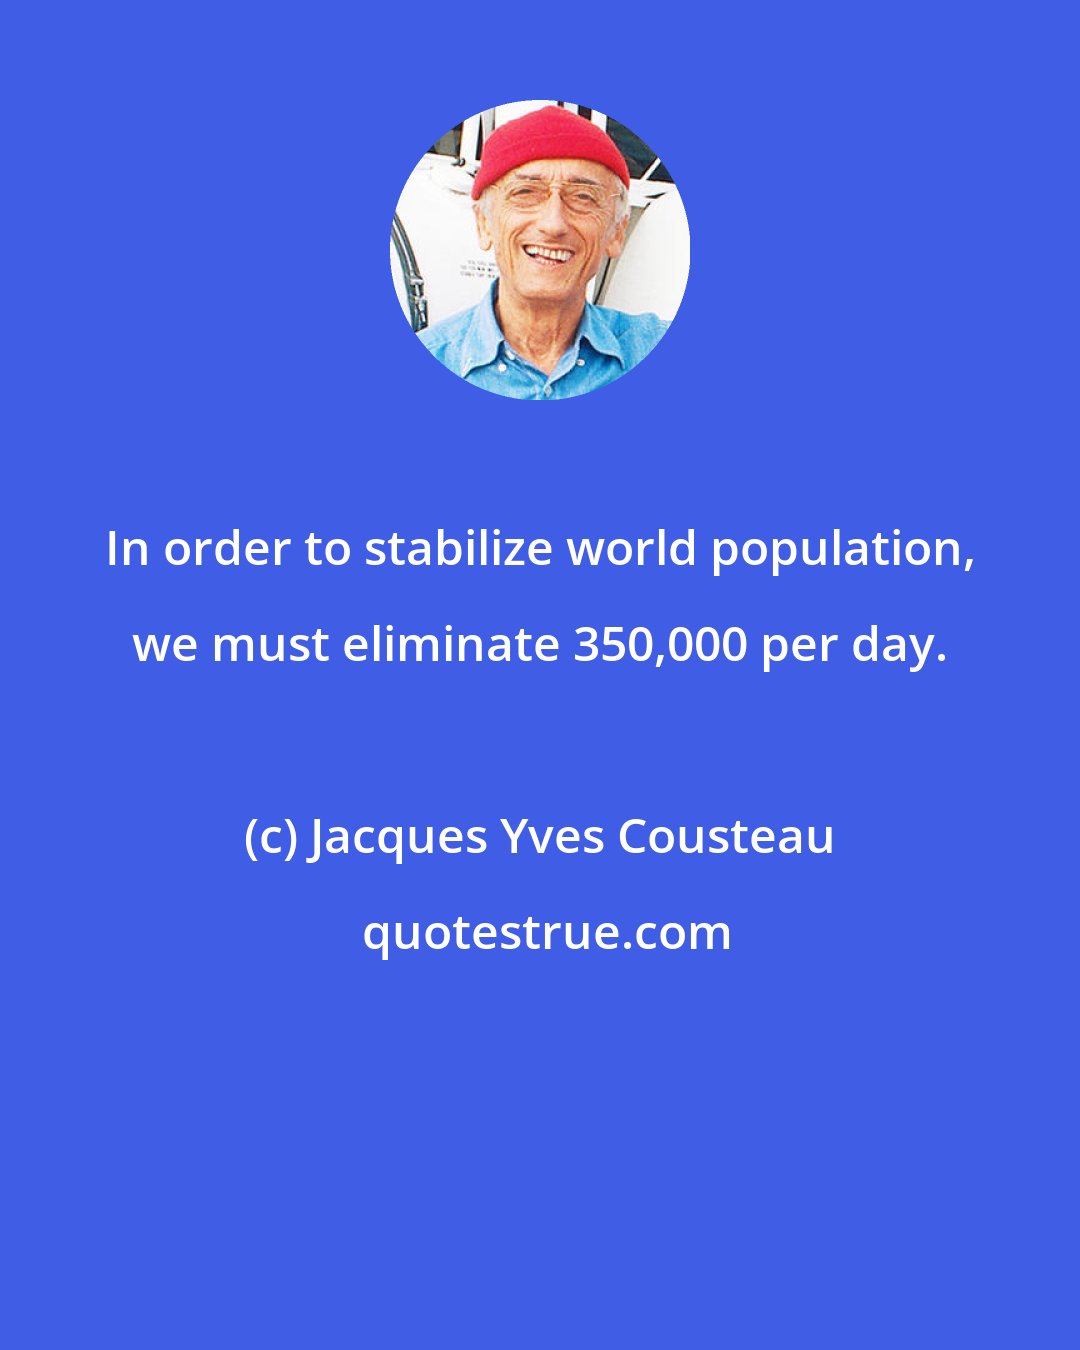 Jacques Yves Cousteau: In order to stabilize world population, we must eliminate 350,000 per day.